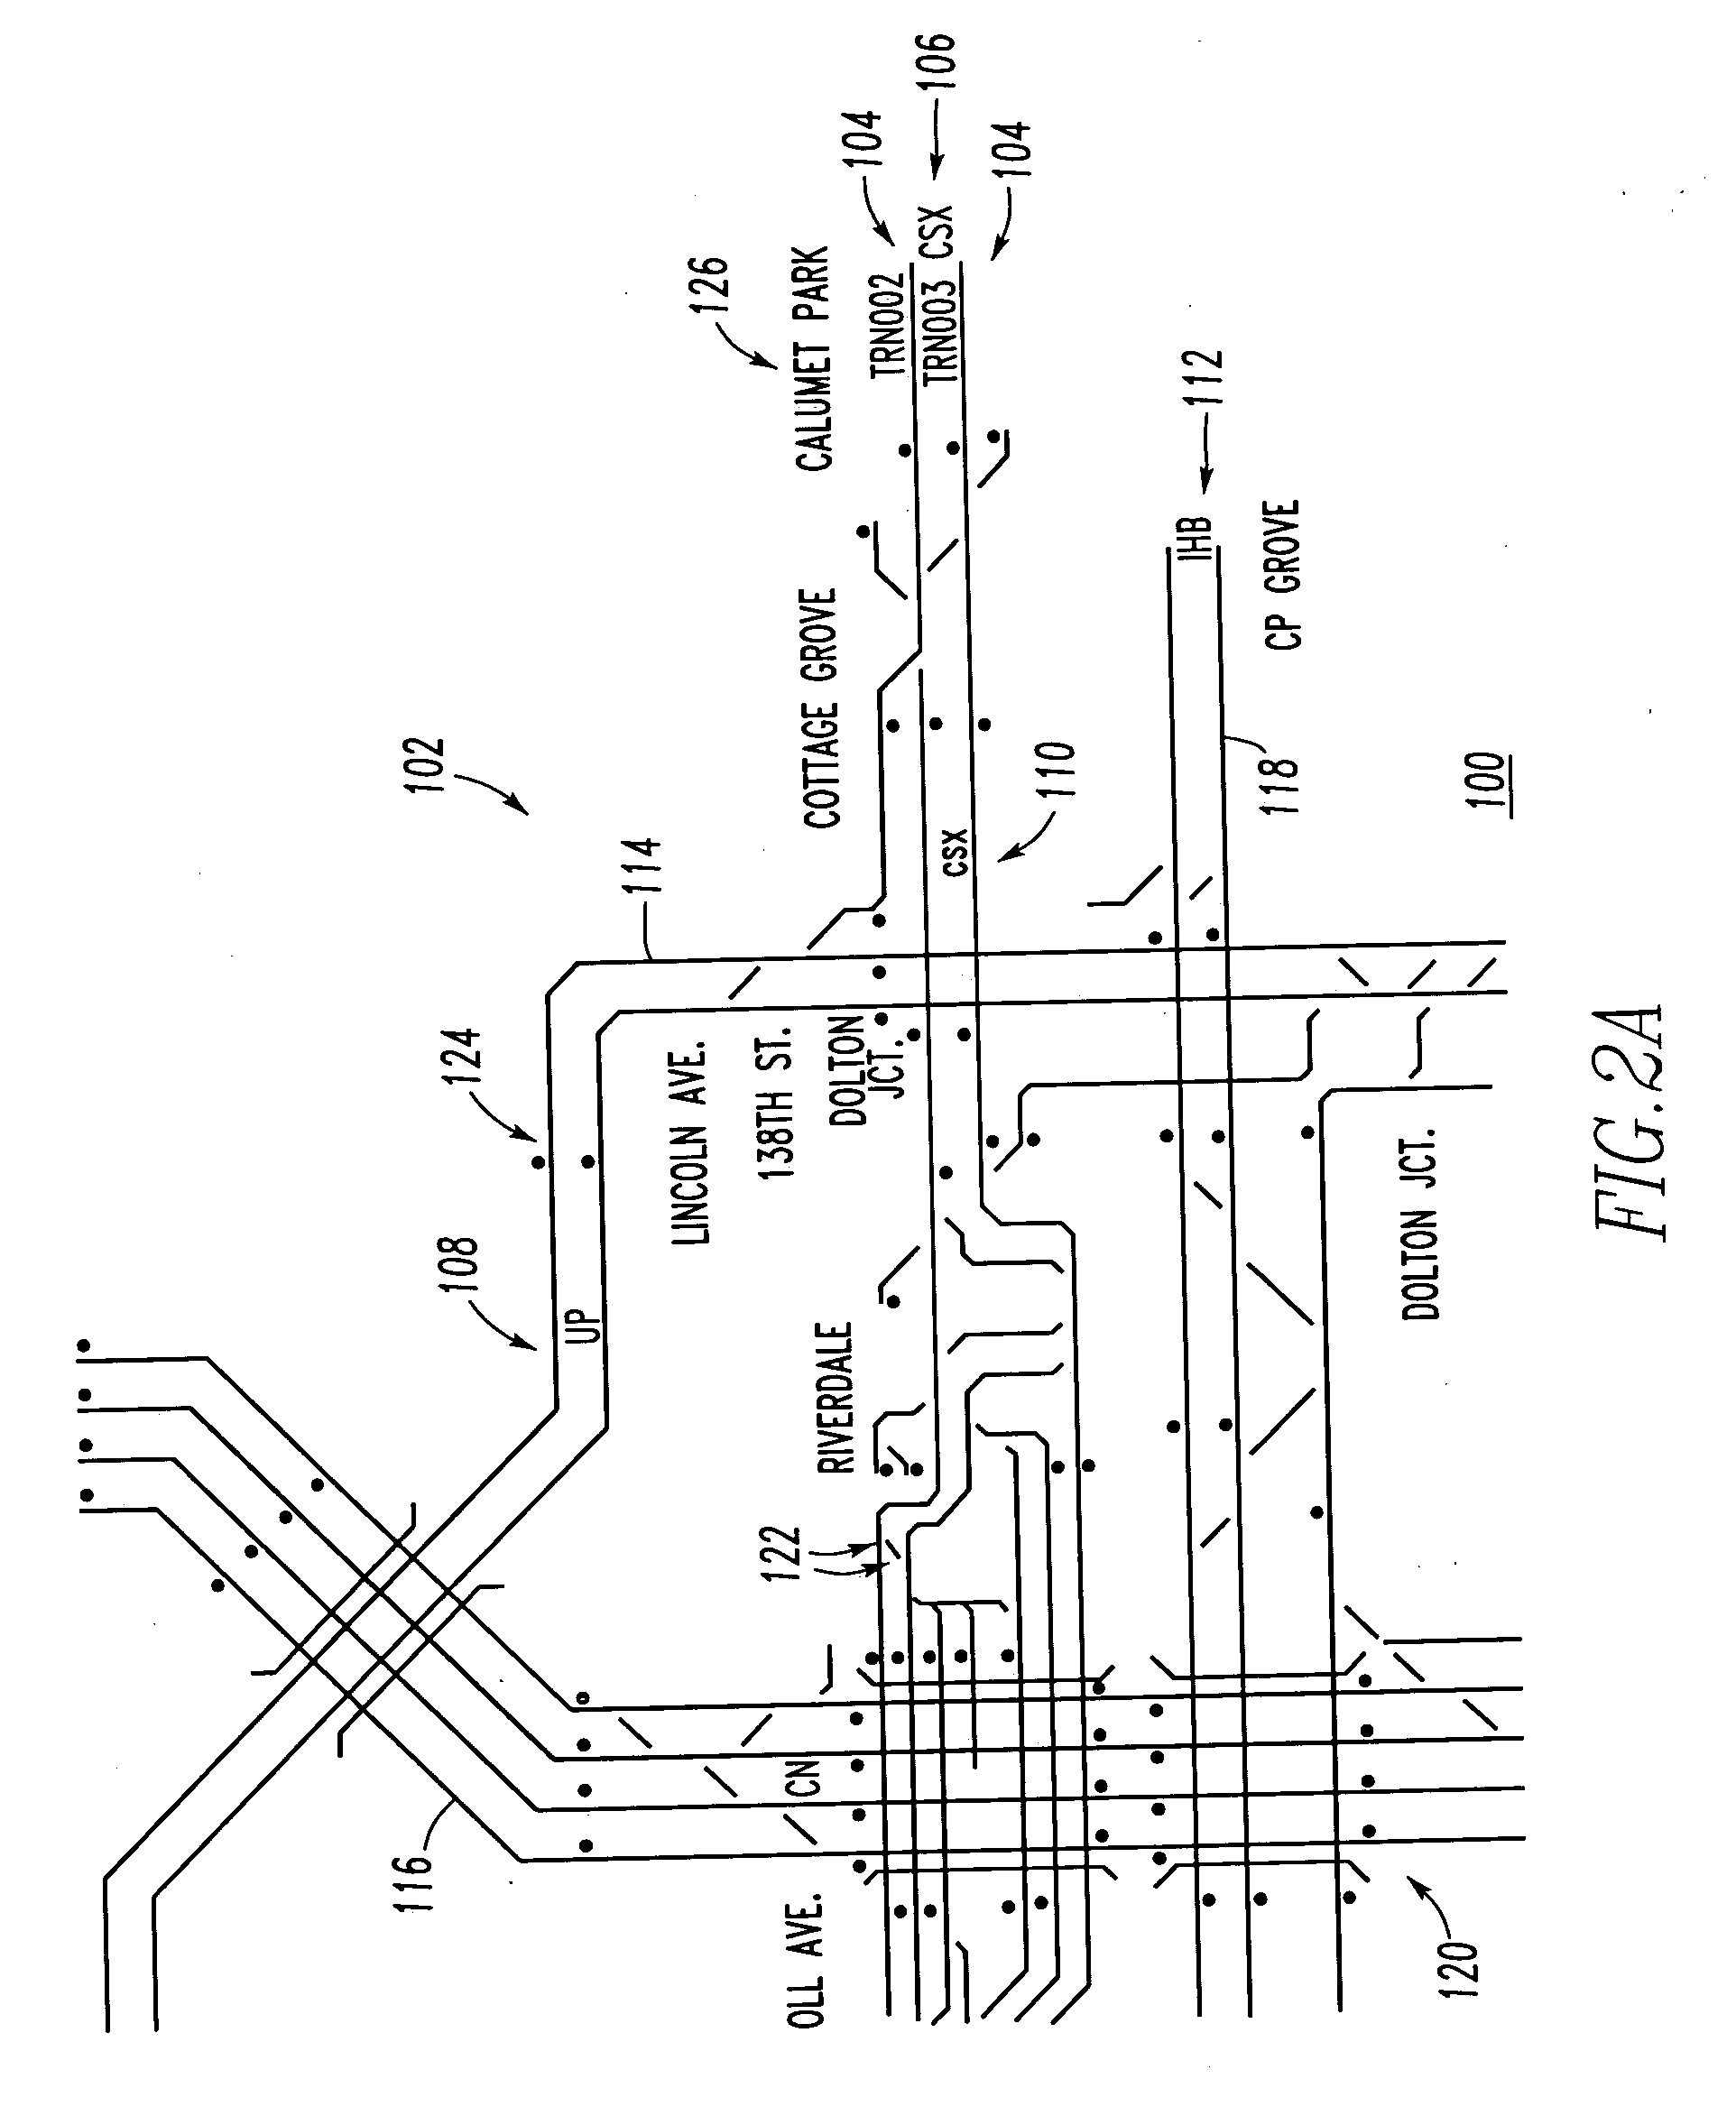 User interface for railroad dispatch monitoring of a geographic region and display system employing a common data format for displaying information from different and diverse railroad CAD systems